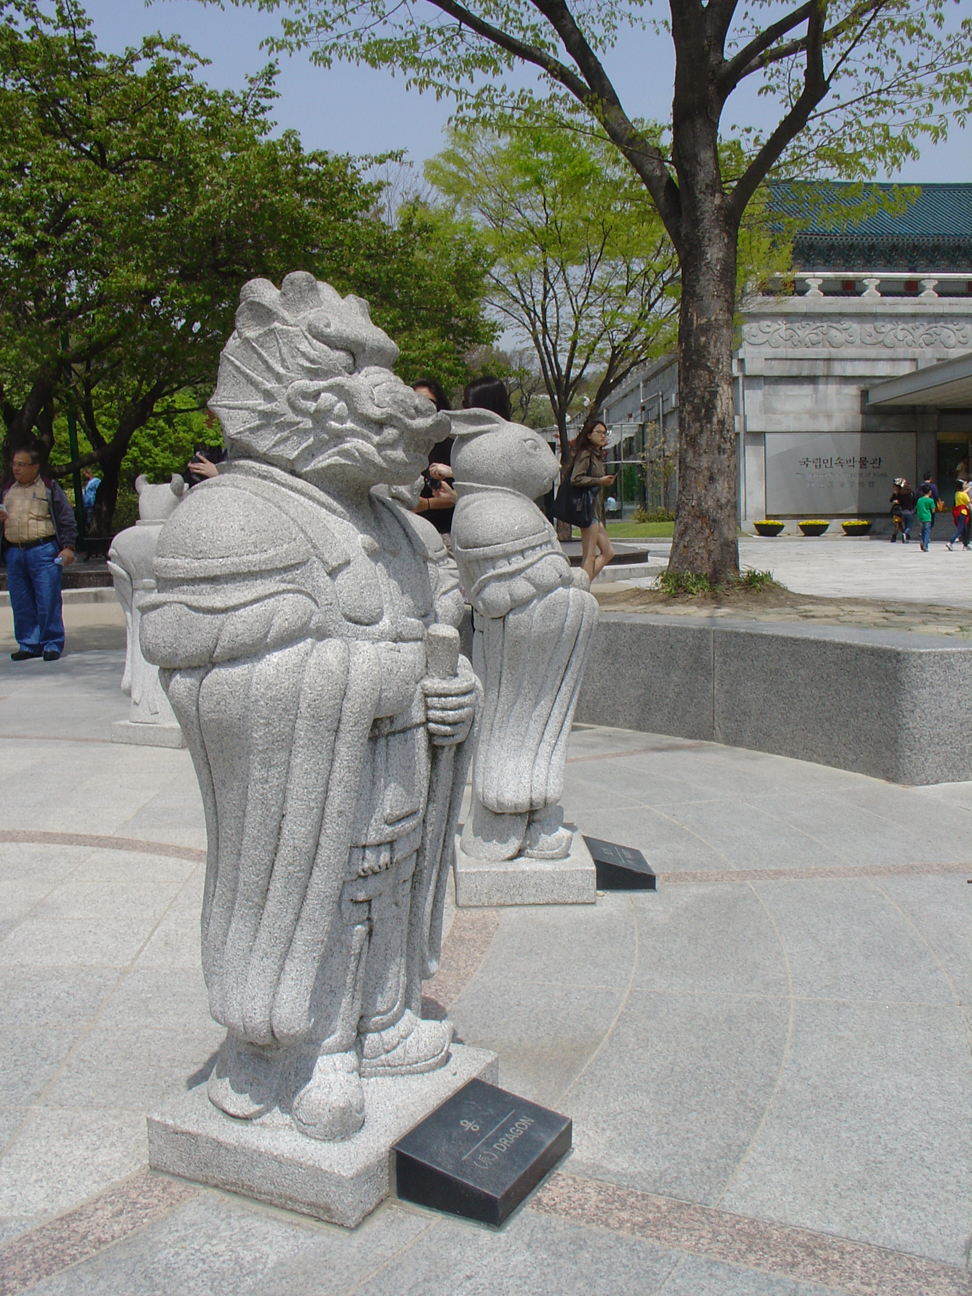 Chinese Zodiac statues, in this picture the dragon and the rabbit.